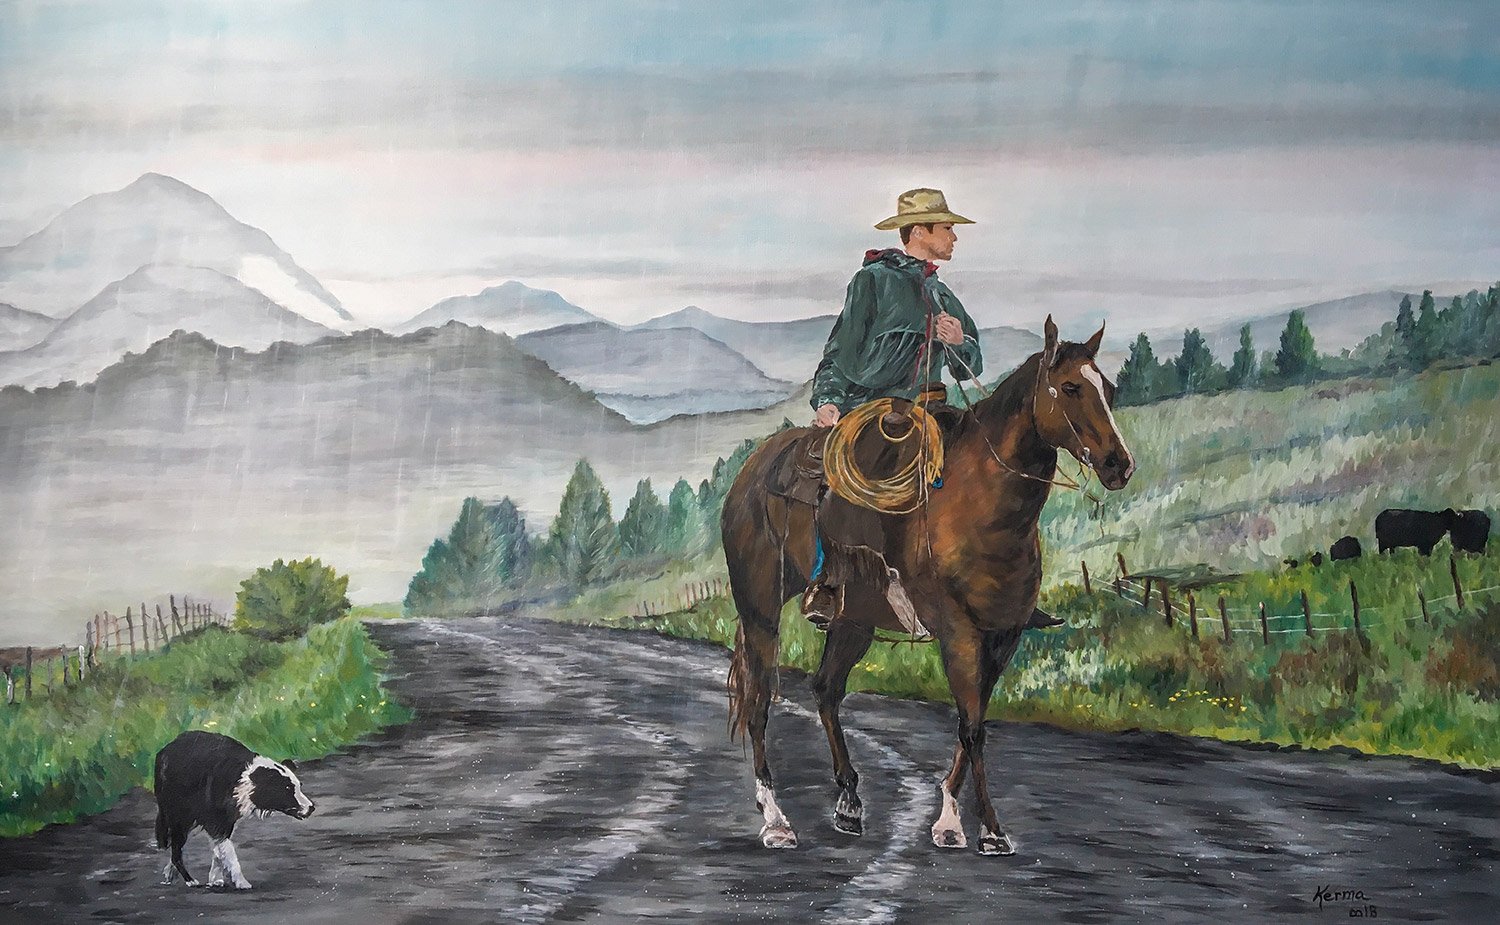 Cowboy photo becomes the inspiration for an acrylic painting